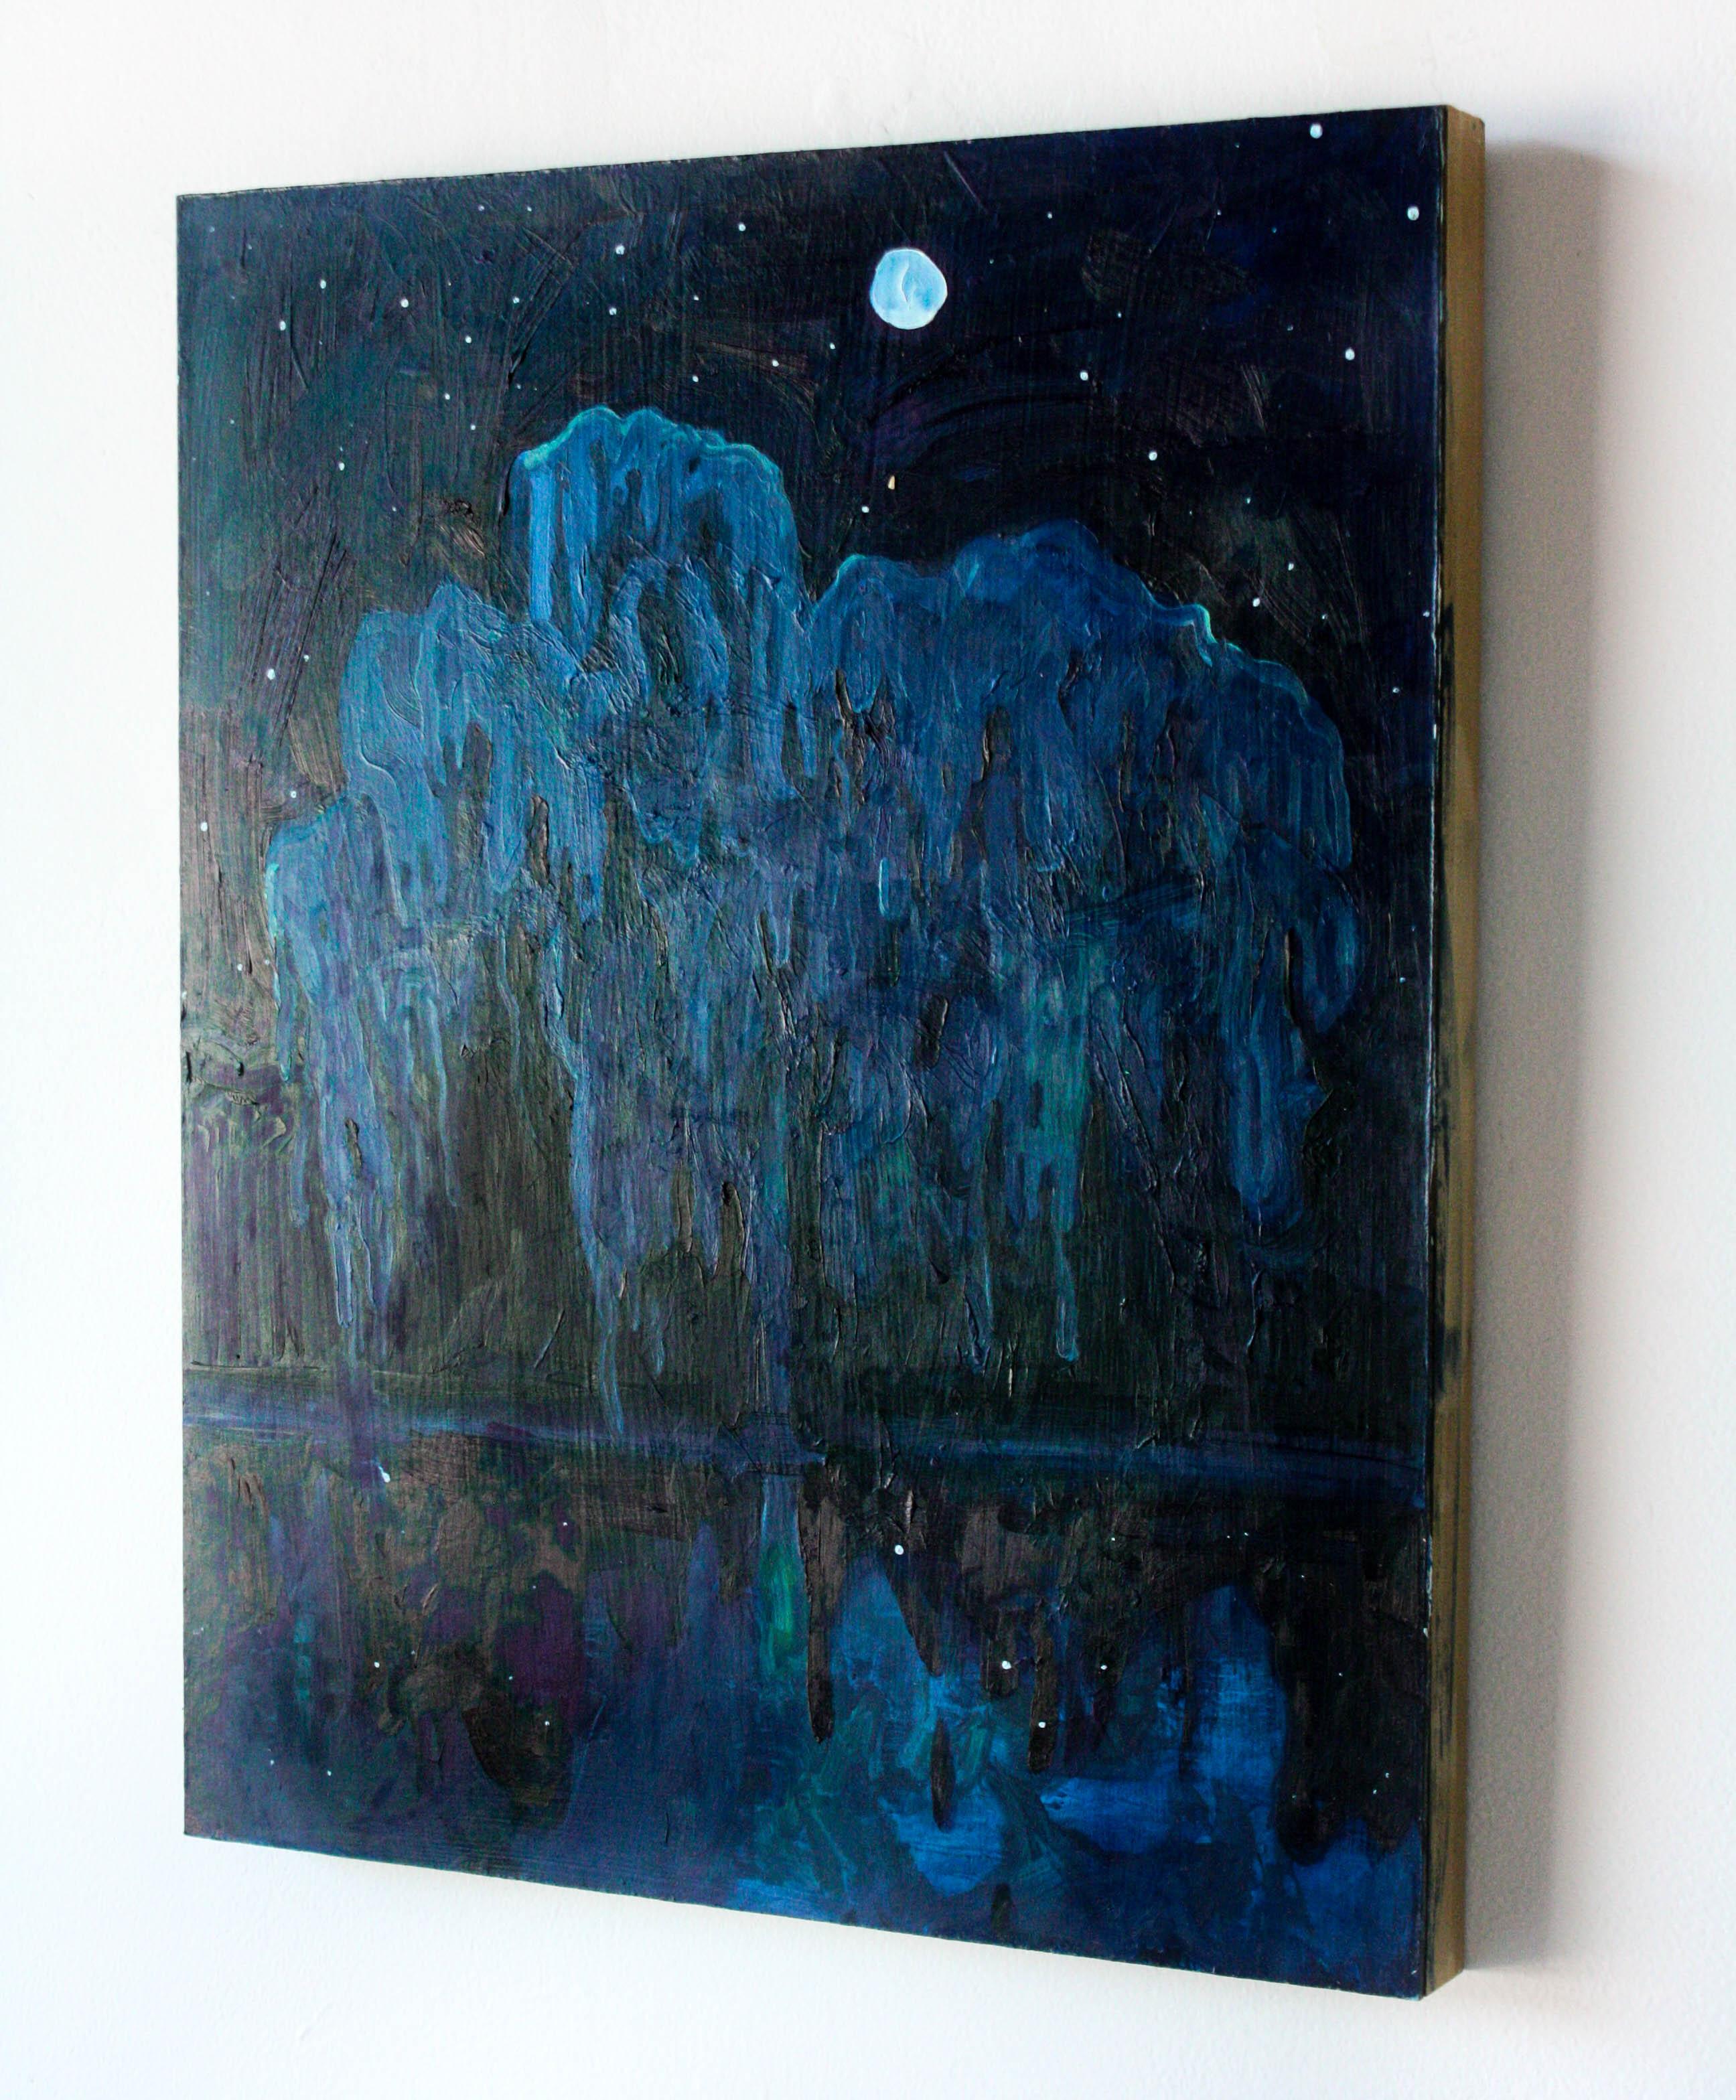 This deep and moody landscape oil painting depicts a tree in the moonlight using hues of blue, purple, violet, and indigo.

My work is about Place. For me, no space is permanent and home is not a fixed entity. Pulling from themes commonly found in